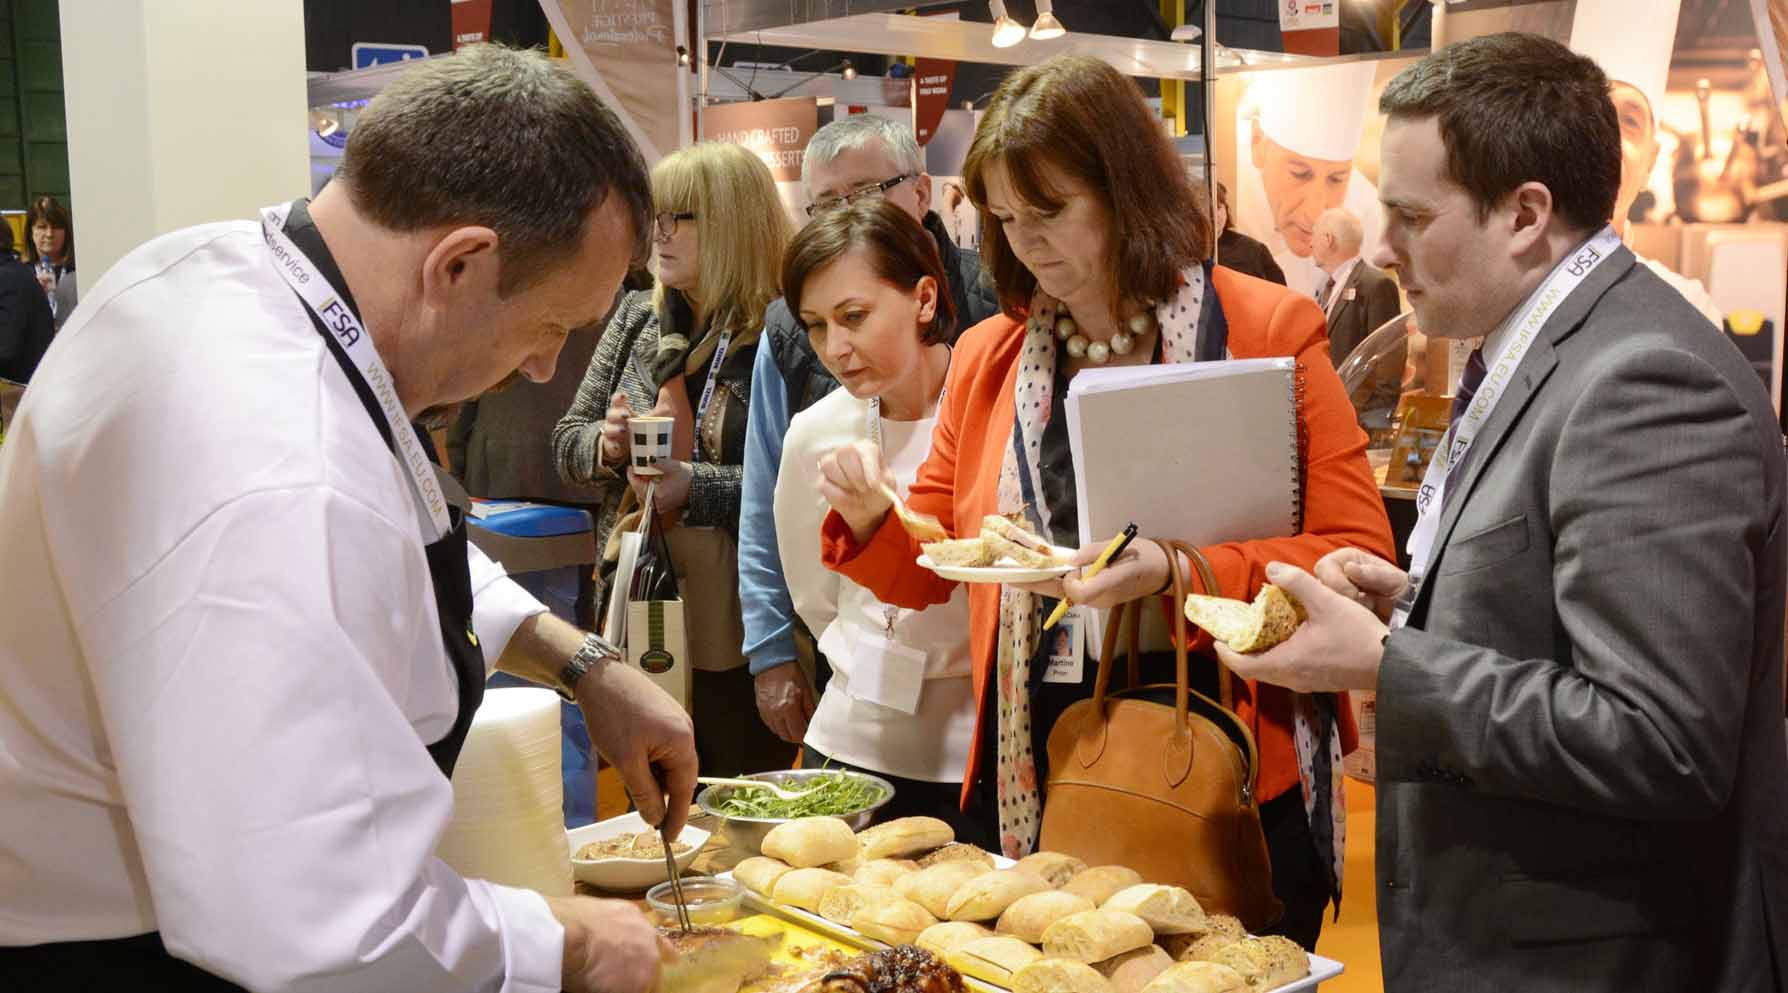 Catex is amongst the longest-running trade expos in Europe.